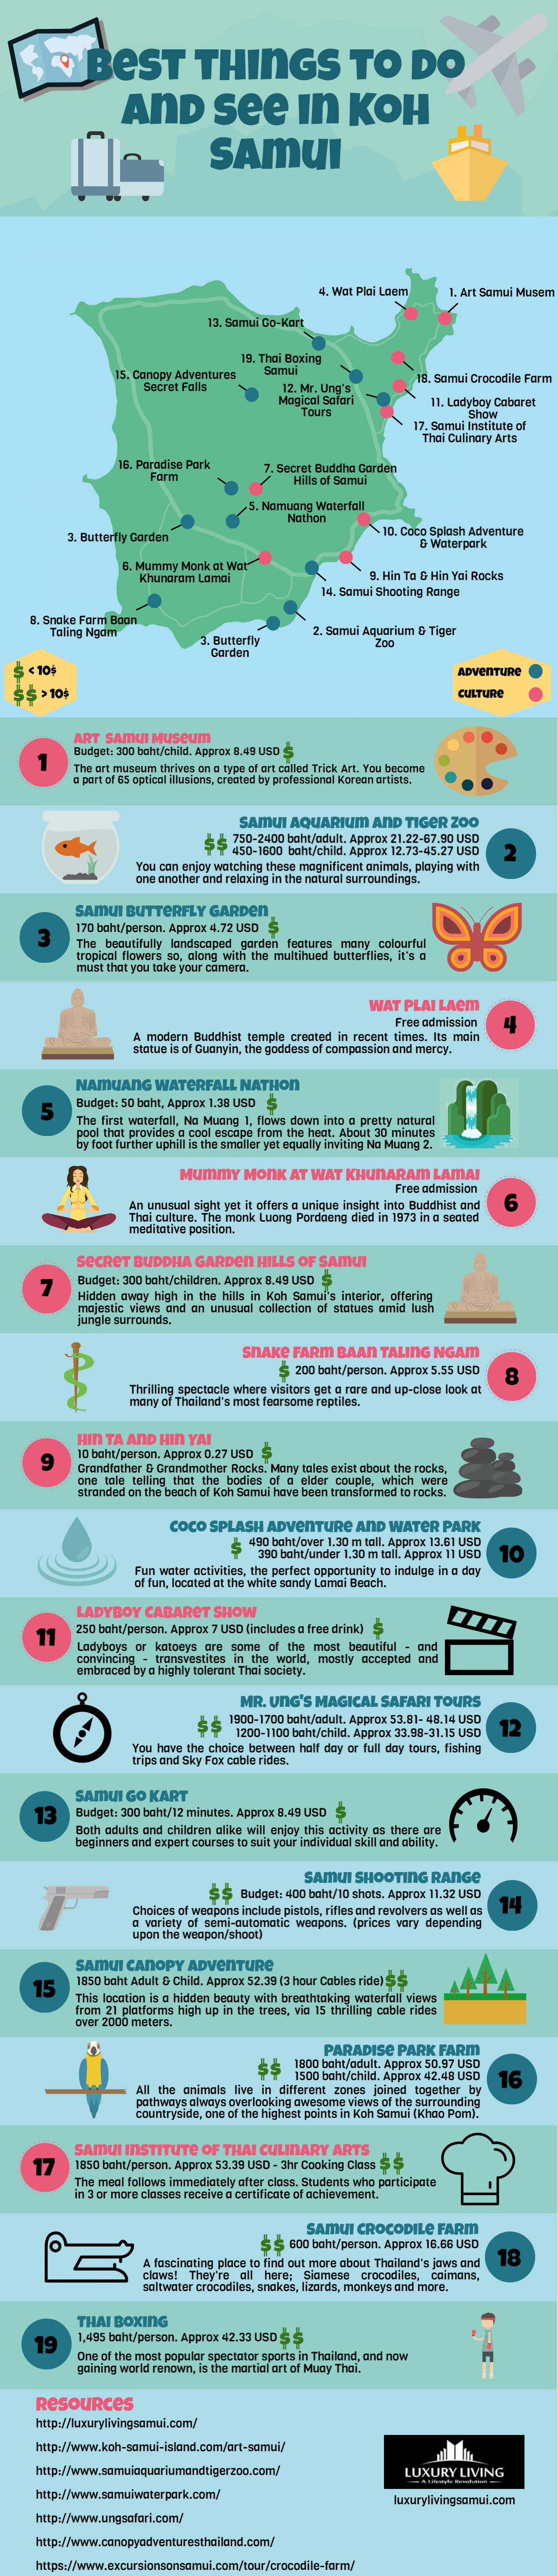 19 Must-Sees and Must-Dos in Thailand’s Island Paradise: Koh Samui - Infographic